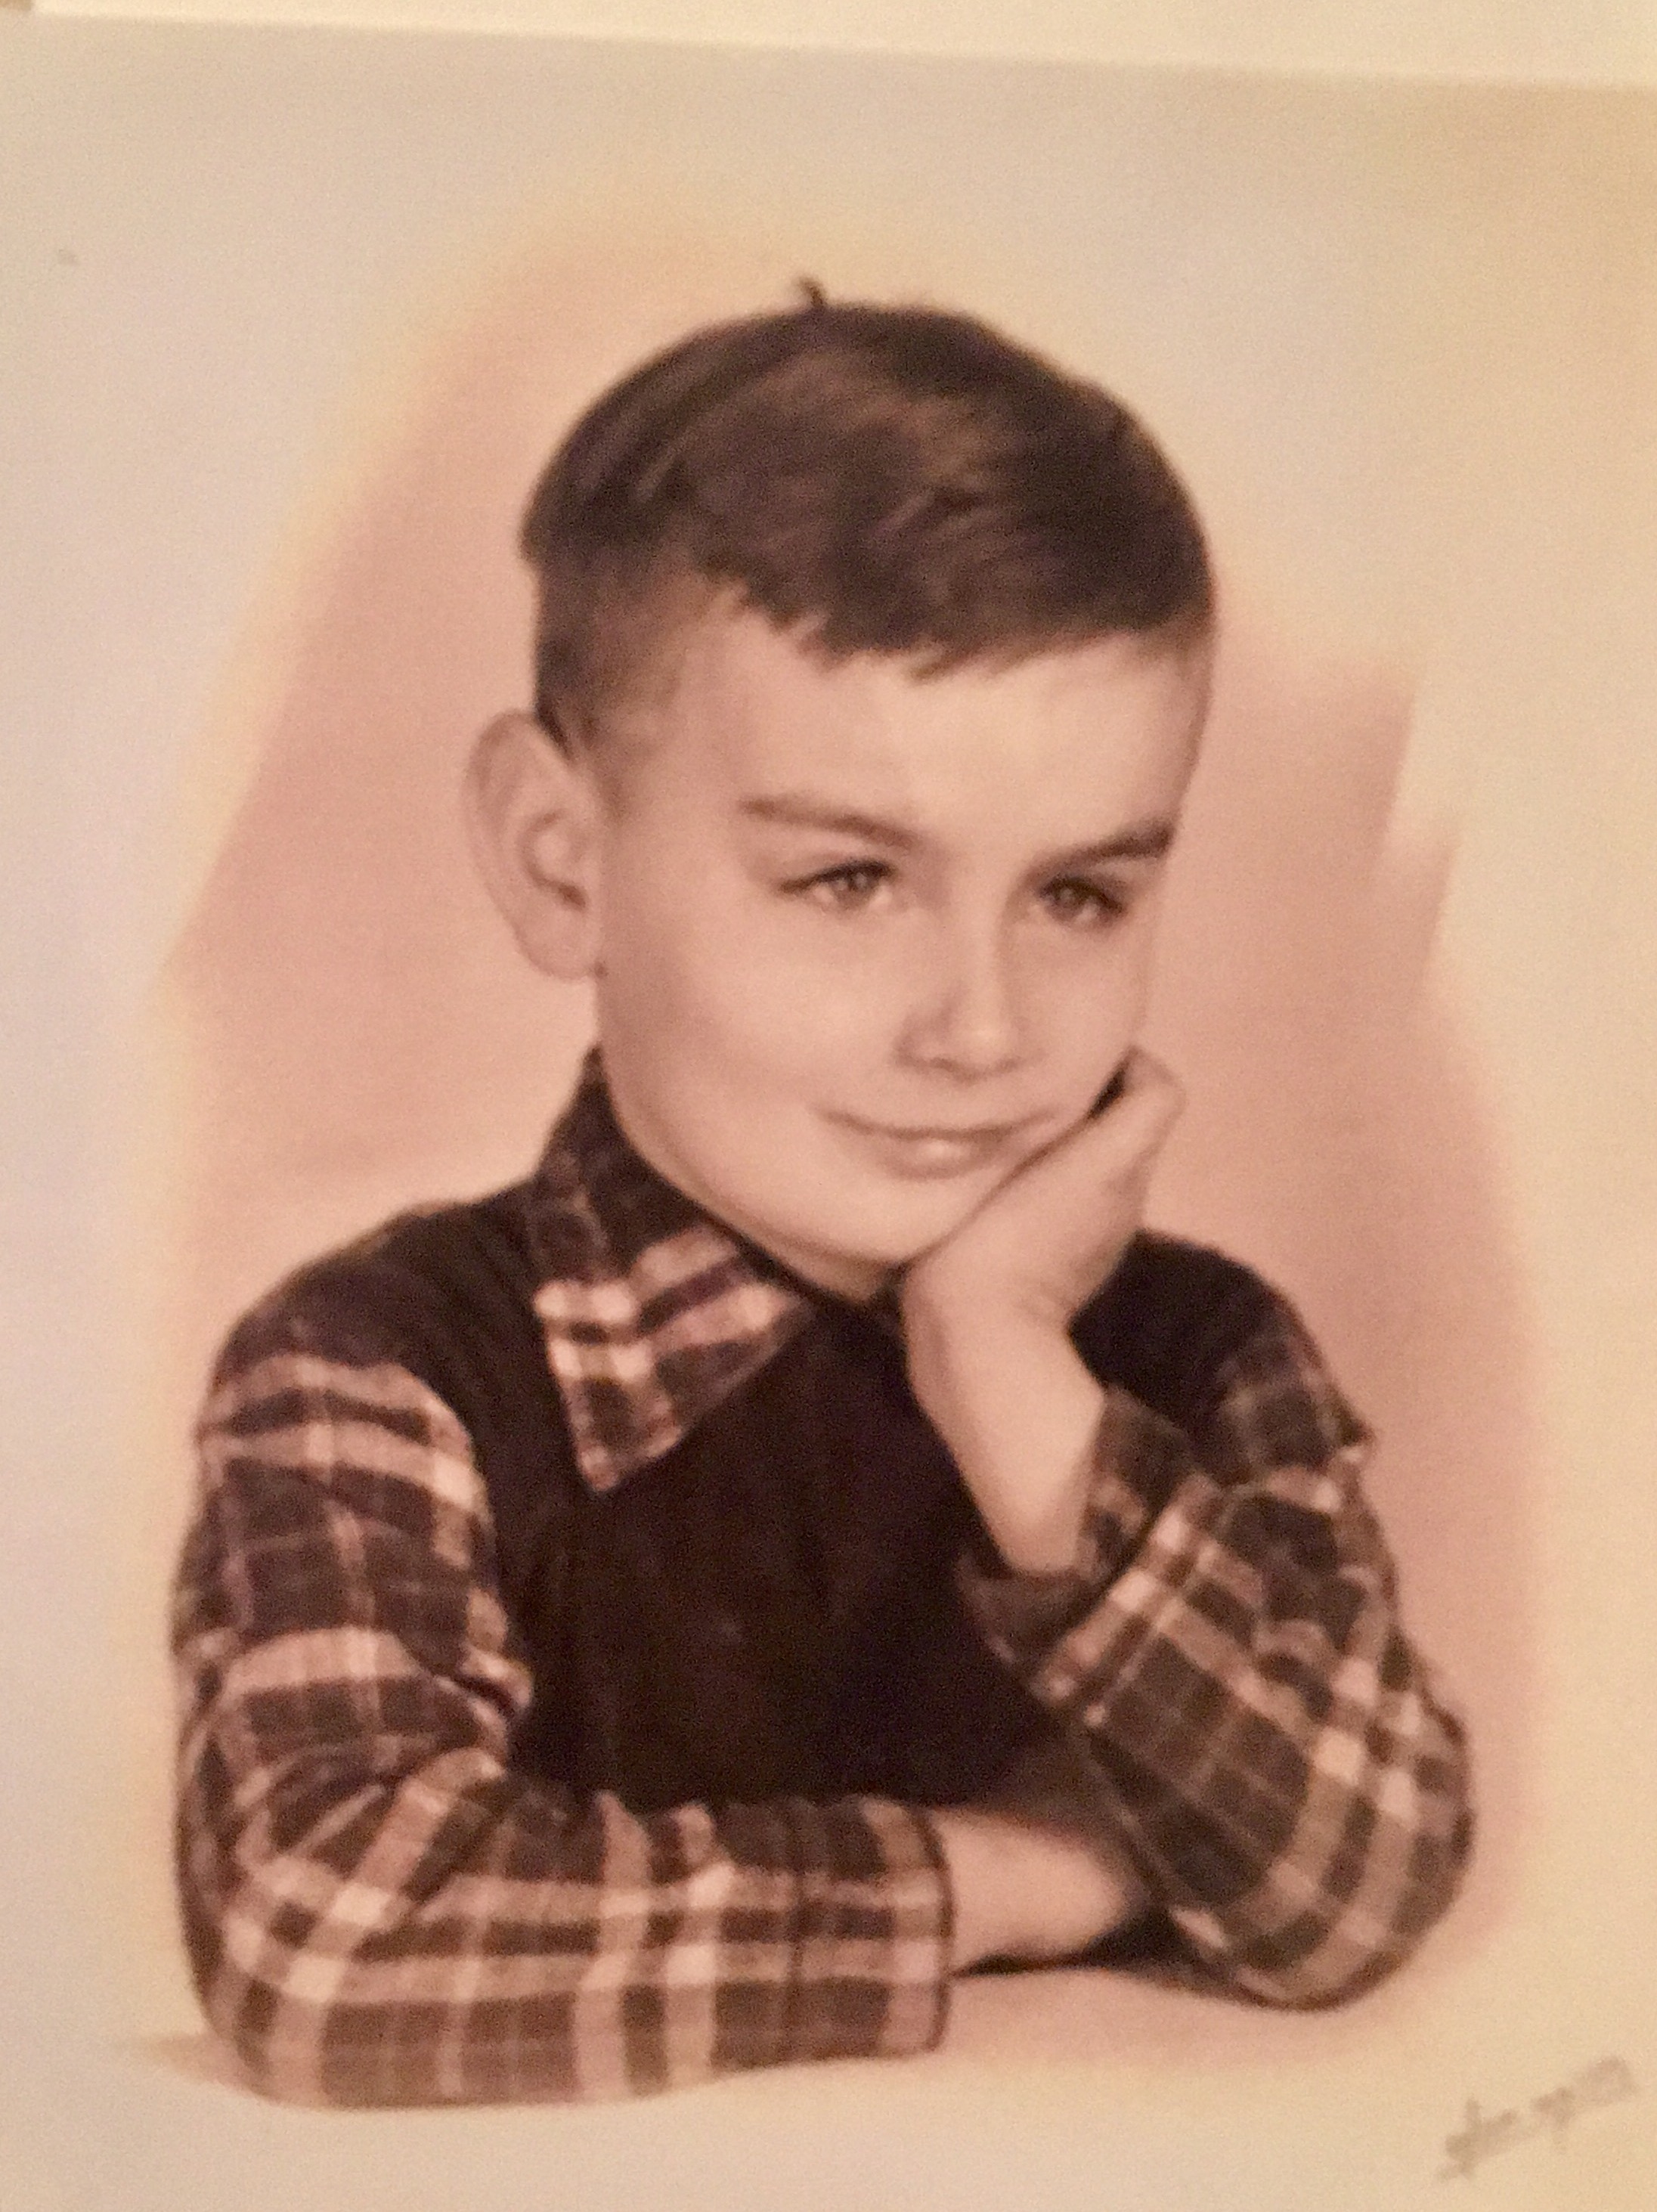 Love this picture of dad as a kid.